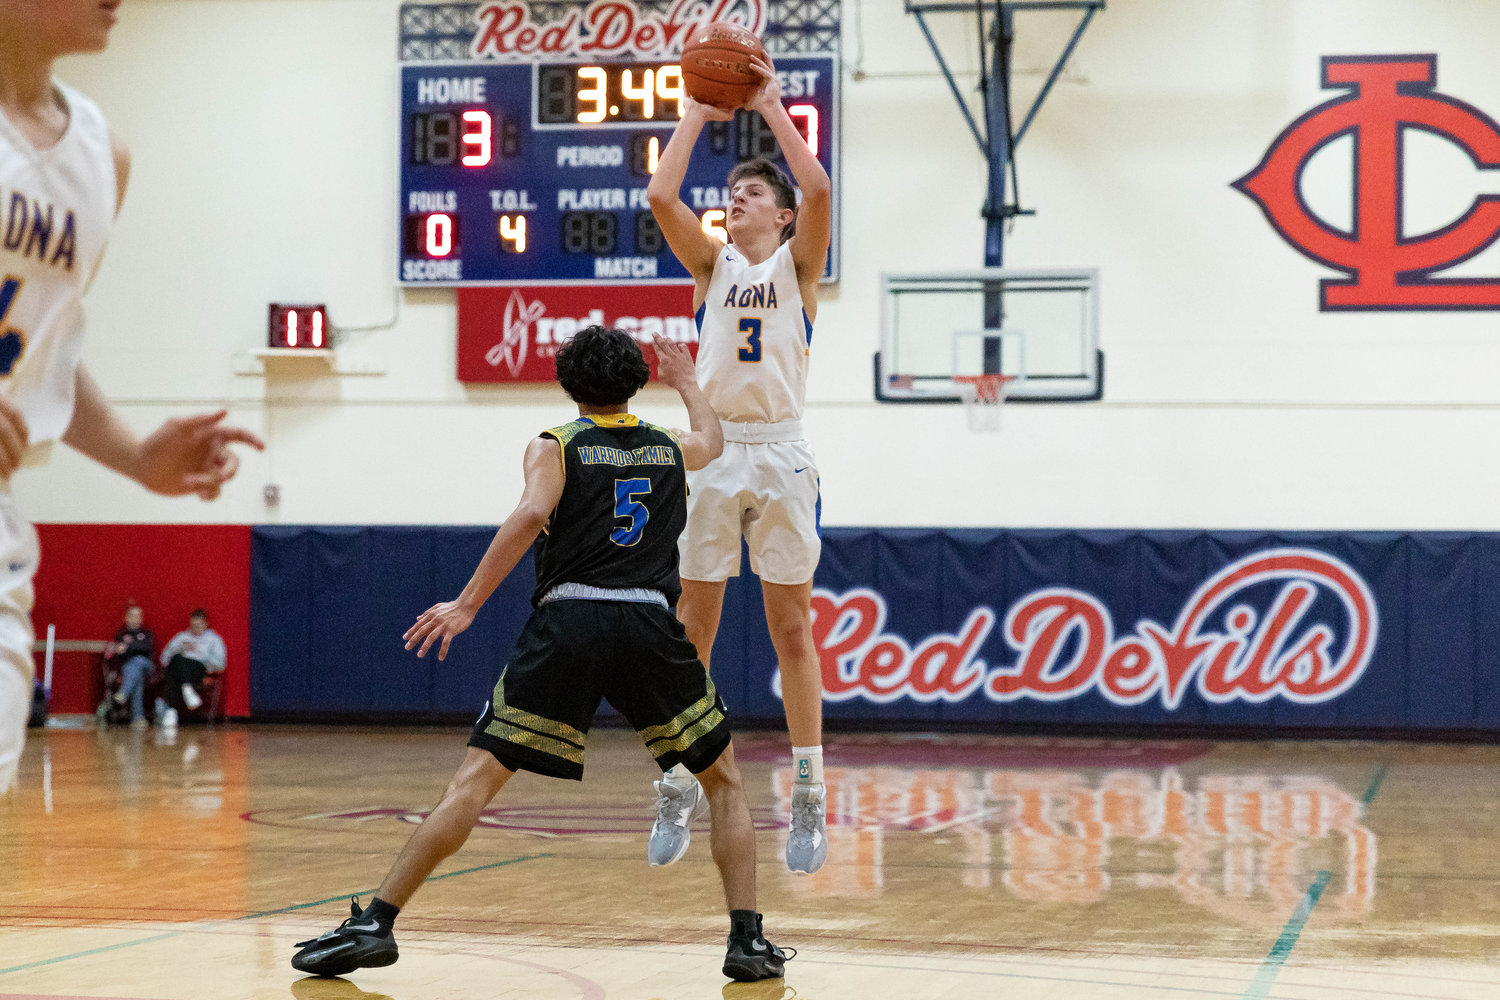 Adna guard Braeden Salme rises for a jumper against Chief Leschi Jan. 16 at the MLK Classic at Lower Columbia College in Longview.